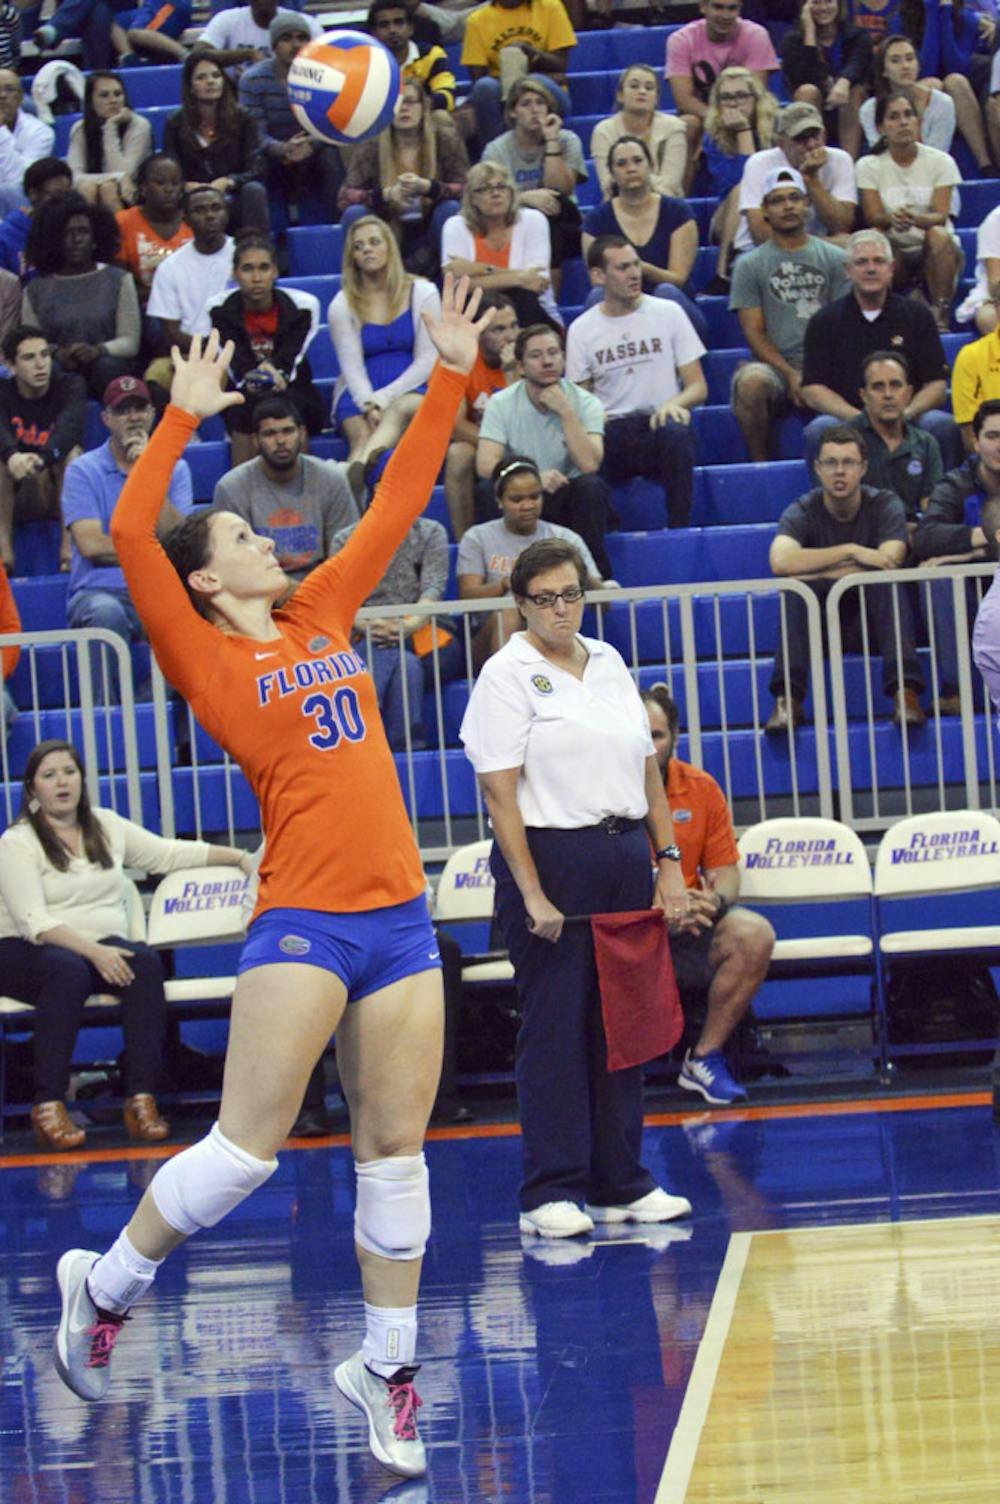 <p>Holly Pole serves during Florida's 3-0 win against Missouri on Oct. 24 in the O'Connell Center</p>